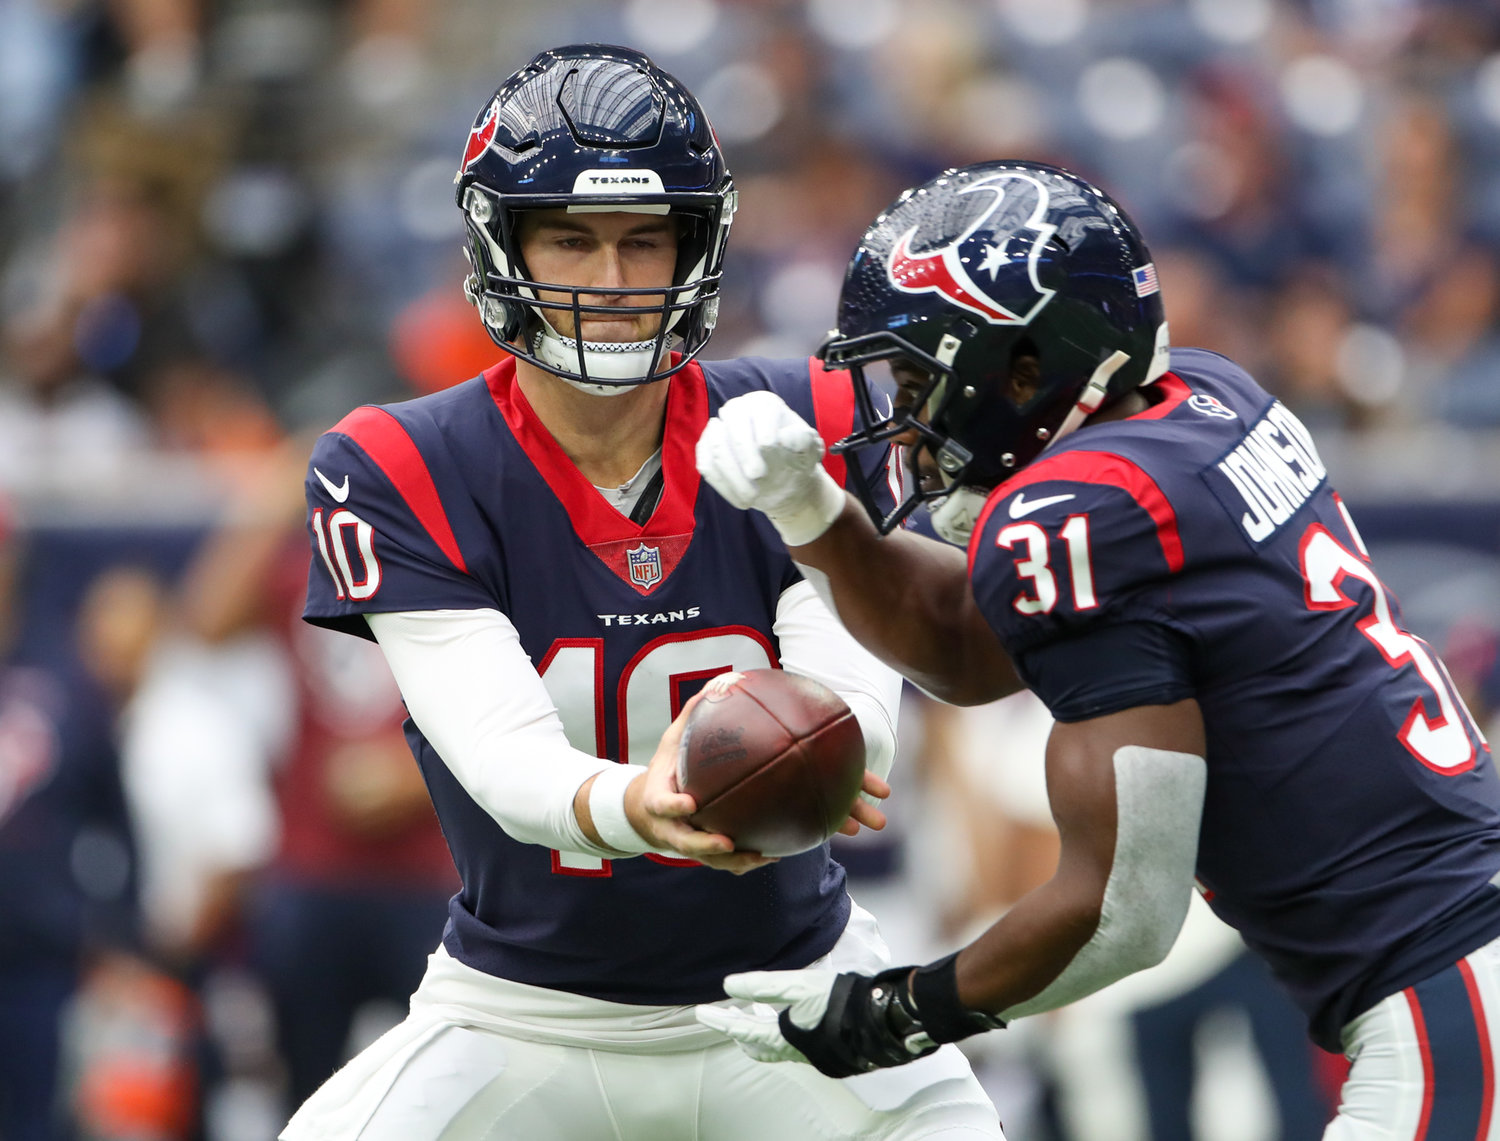 Houston Texans quarterback Davis Mills (10) hands the ball off to running back David Johnson (31) during an NFL game between Houston and the Los Angeles Rams on October 31, 2021 in Houston, Texas.